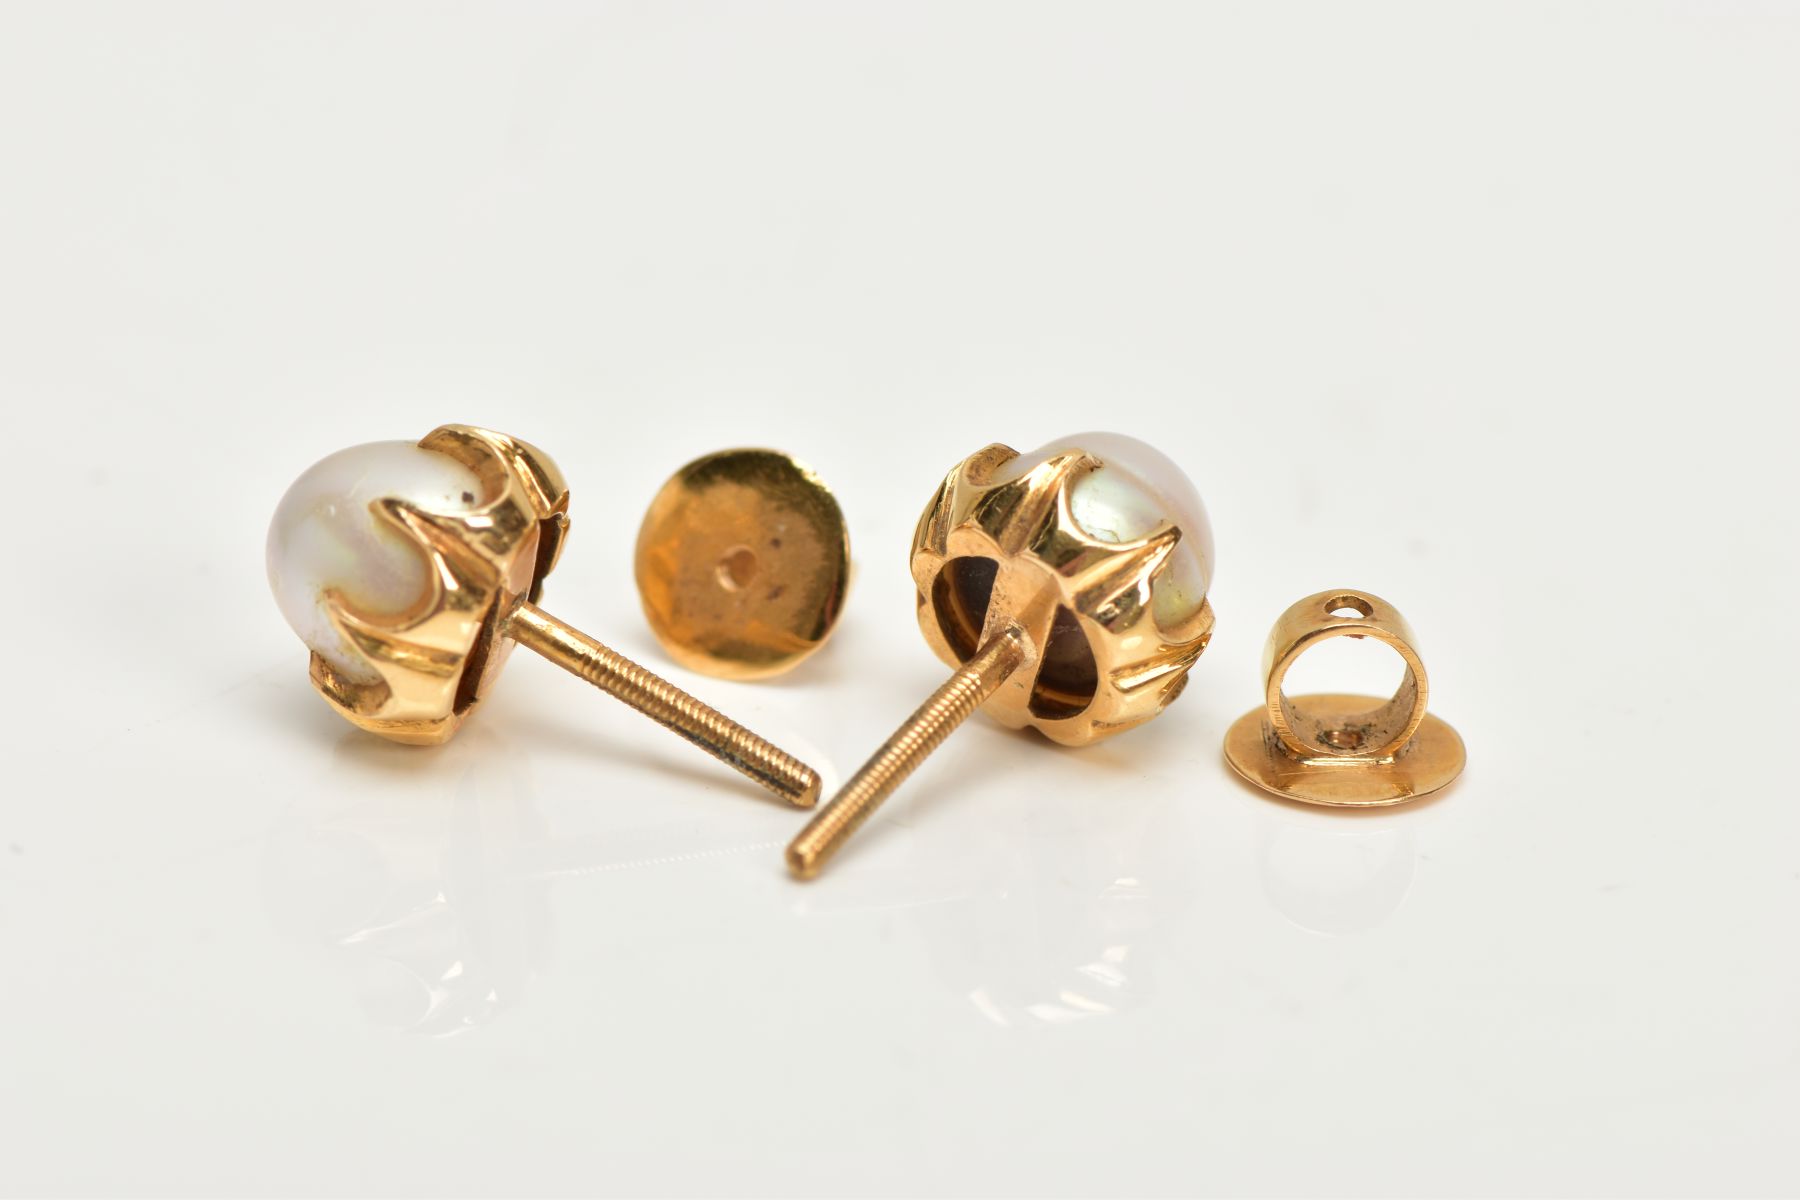 A PAIR OF YELLOW METAL CULTURED PEARL EARRINGS, each ear stud set with a cultured pearl, measuring - Bild 3 aus 3